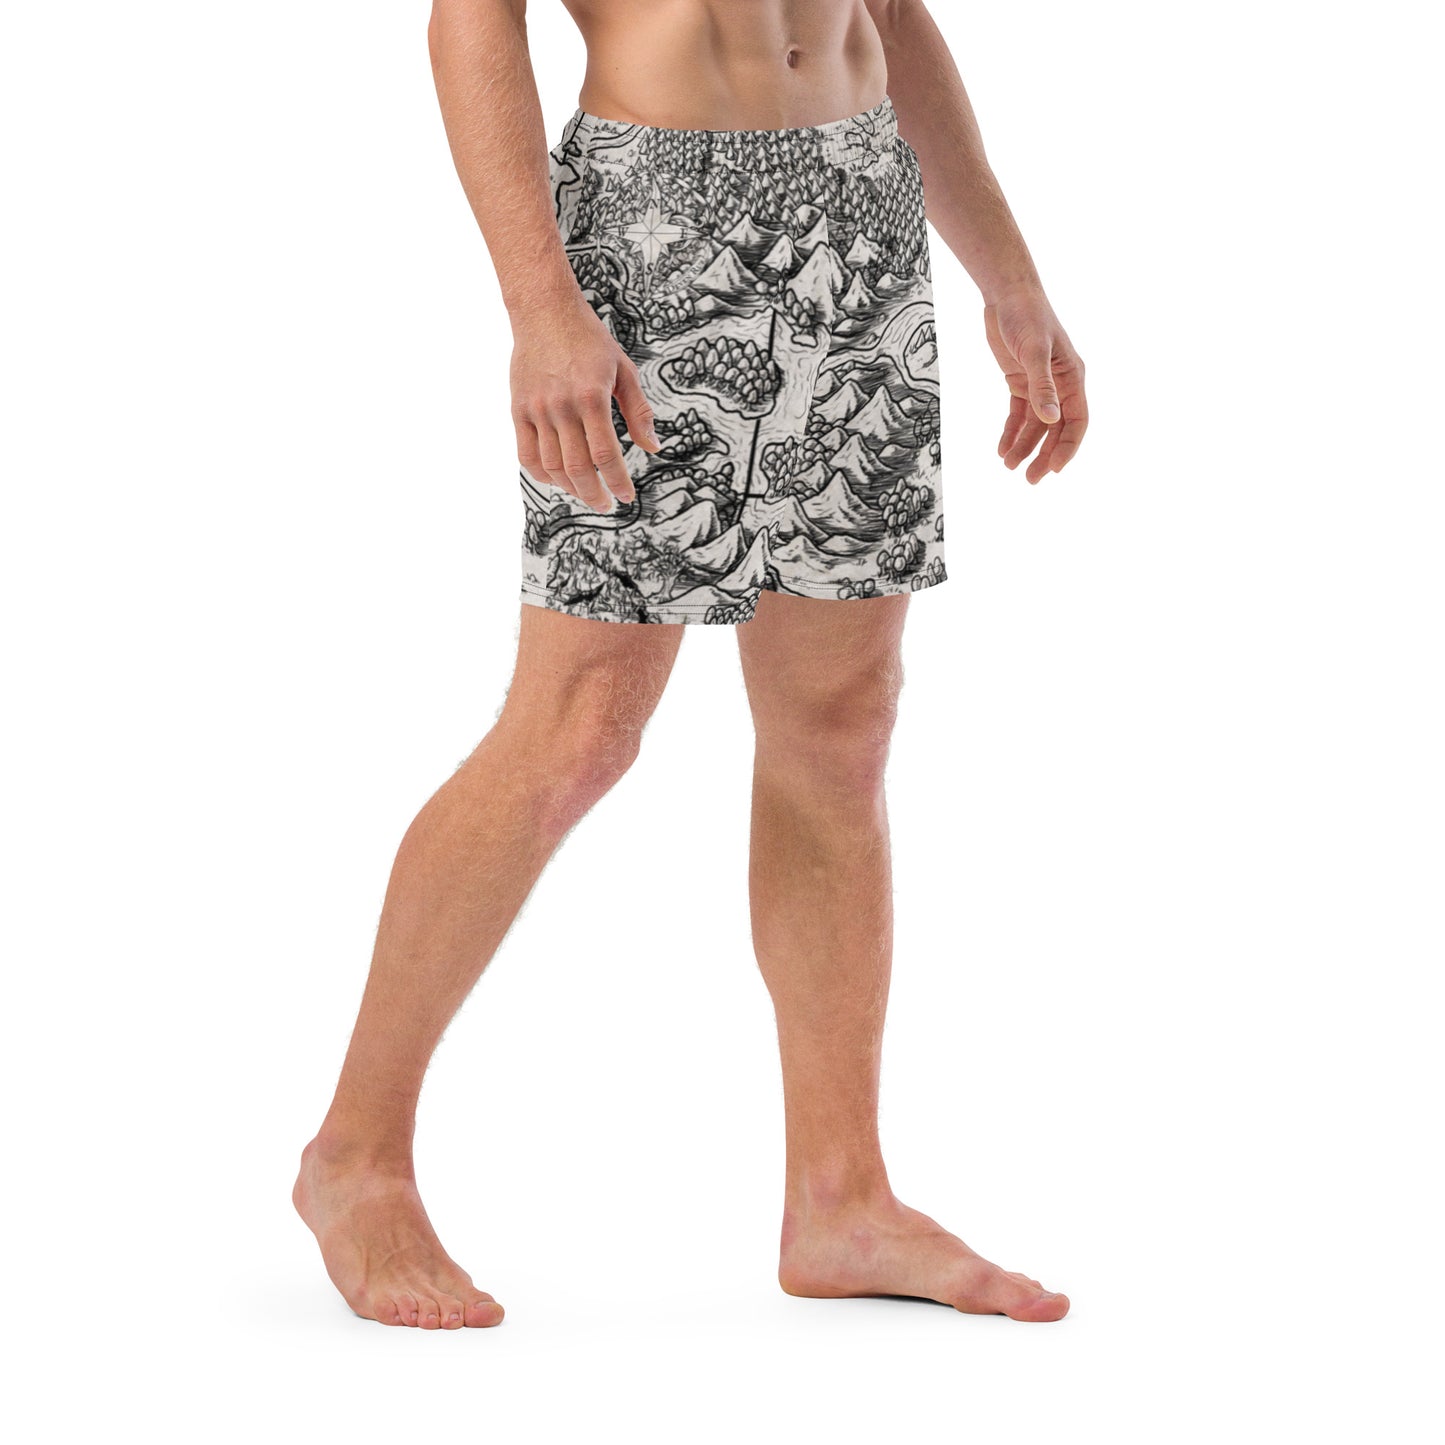 A model wears the Unexpected map swim trunks by Deven Rue.